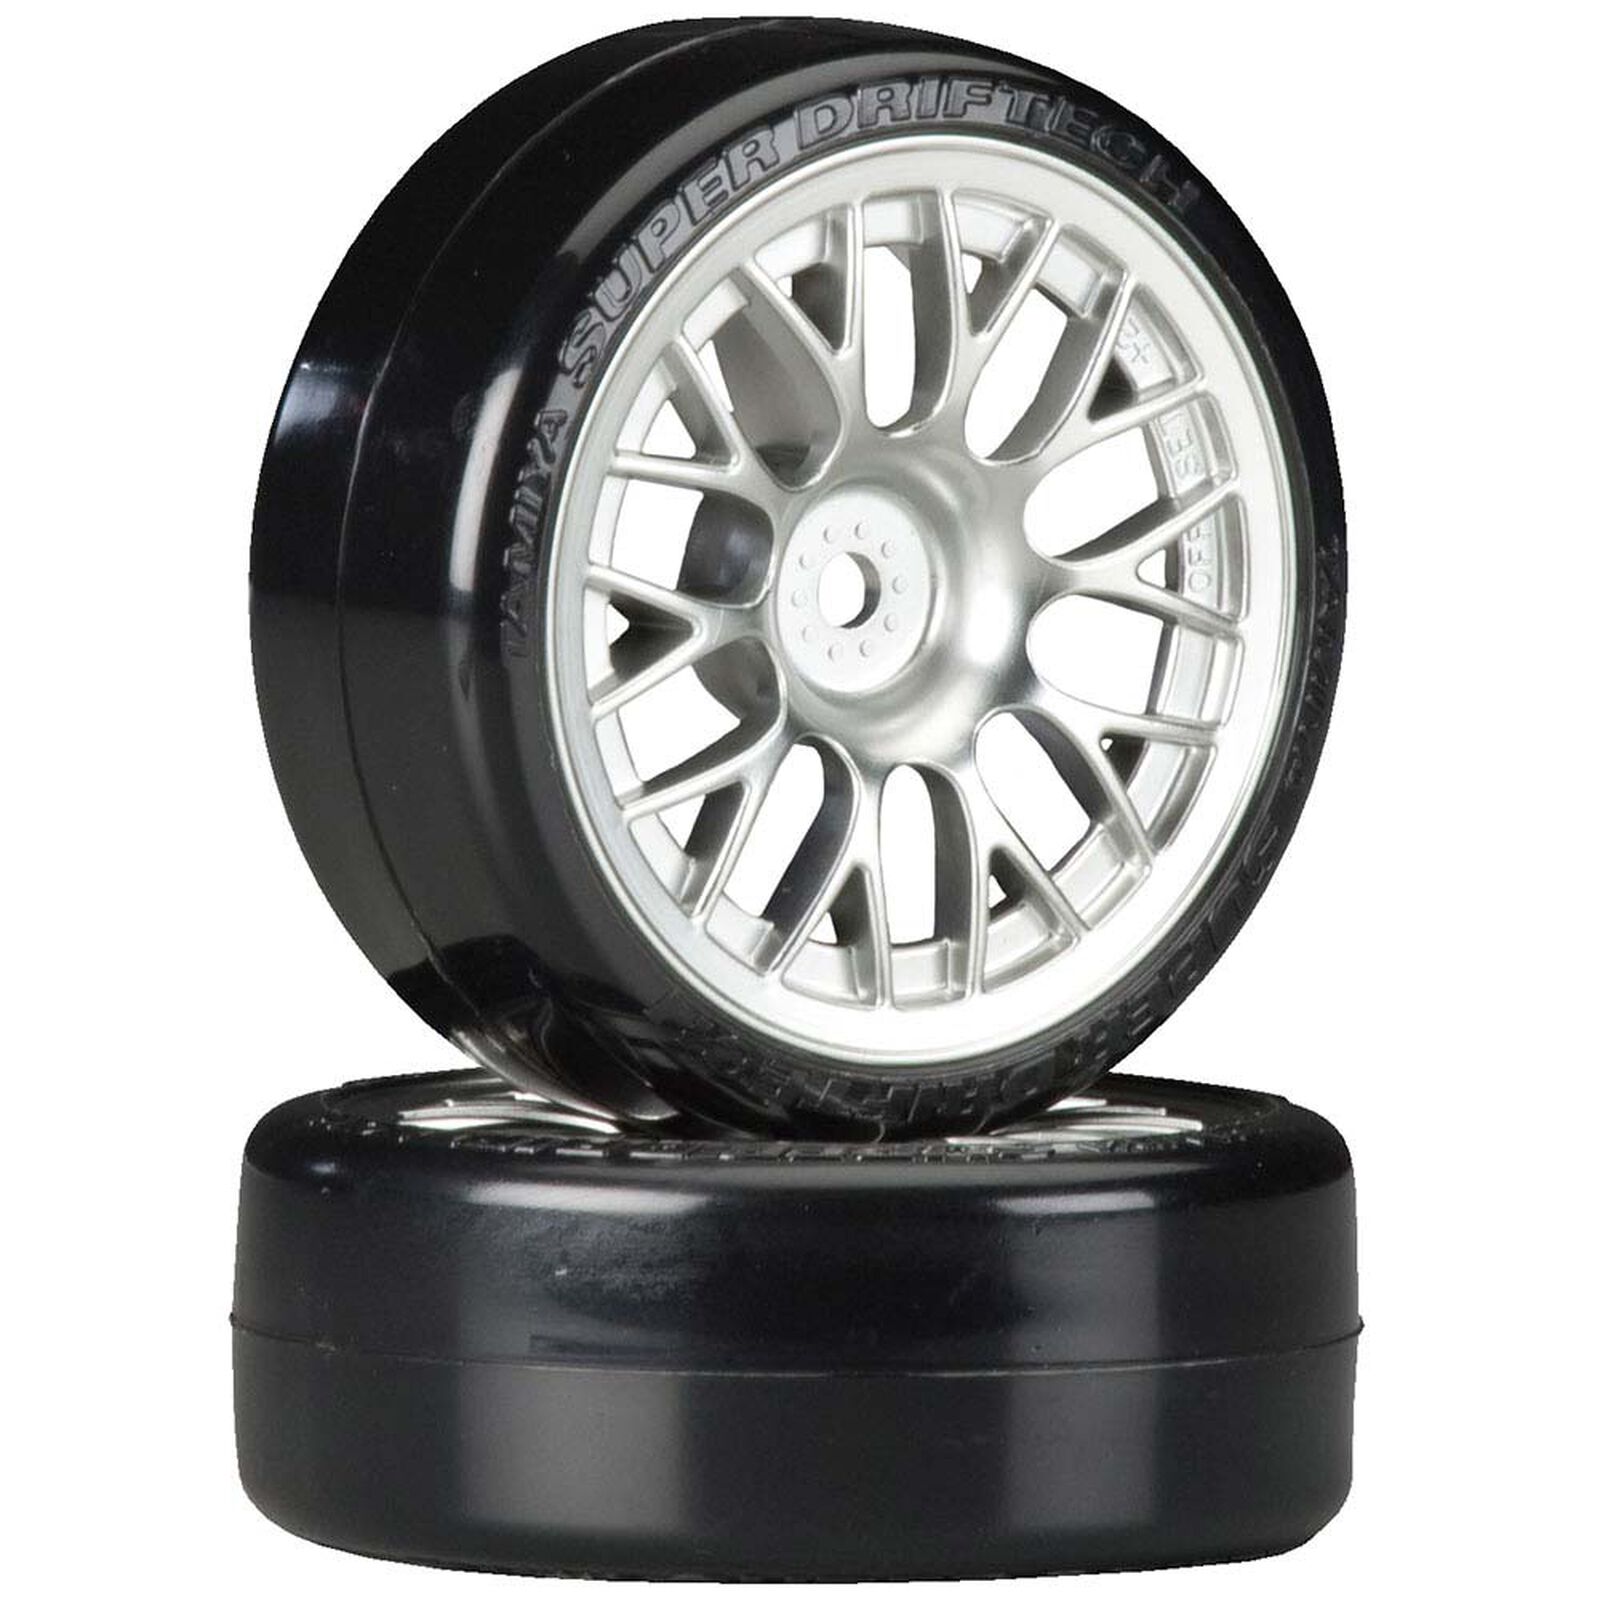 Metal Plated Mesh Wheels with Cmntd Sup Driftech Tires, 24mm (2)